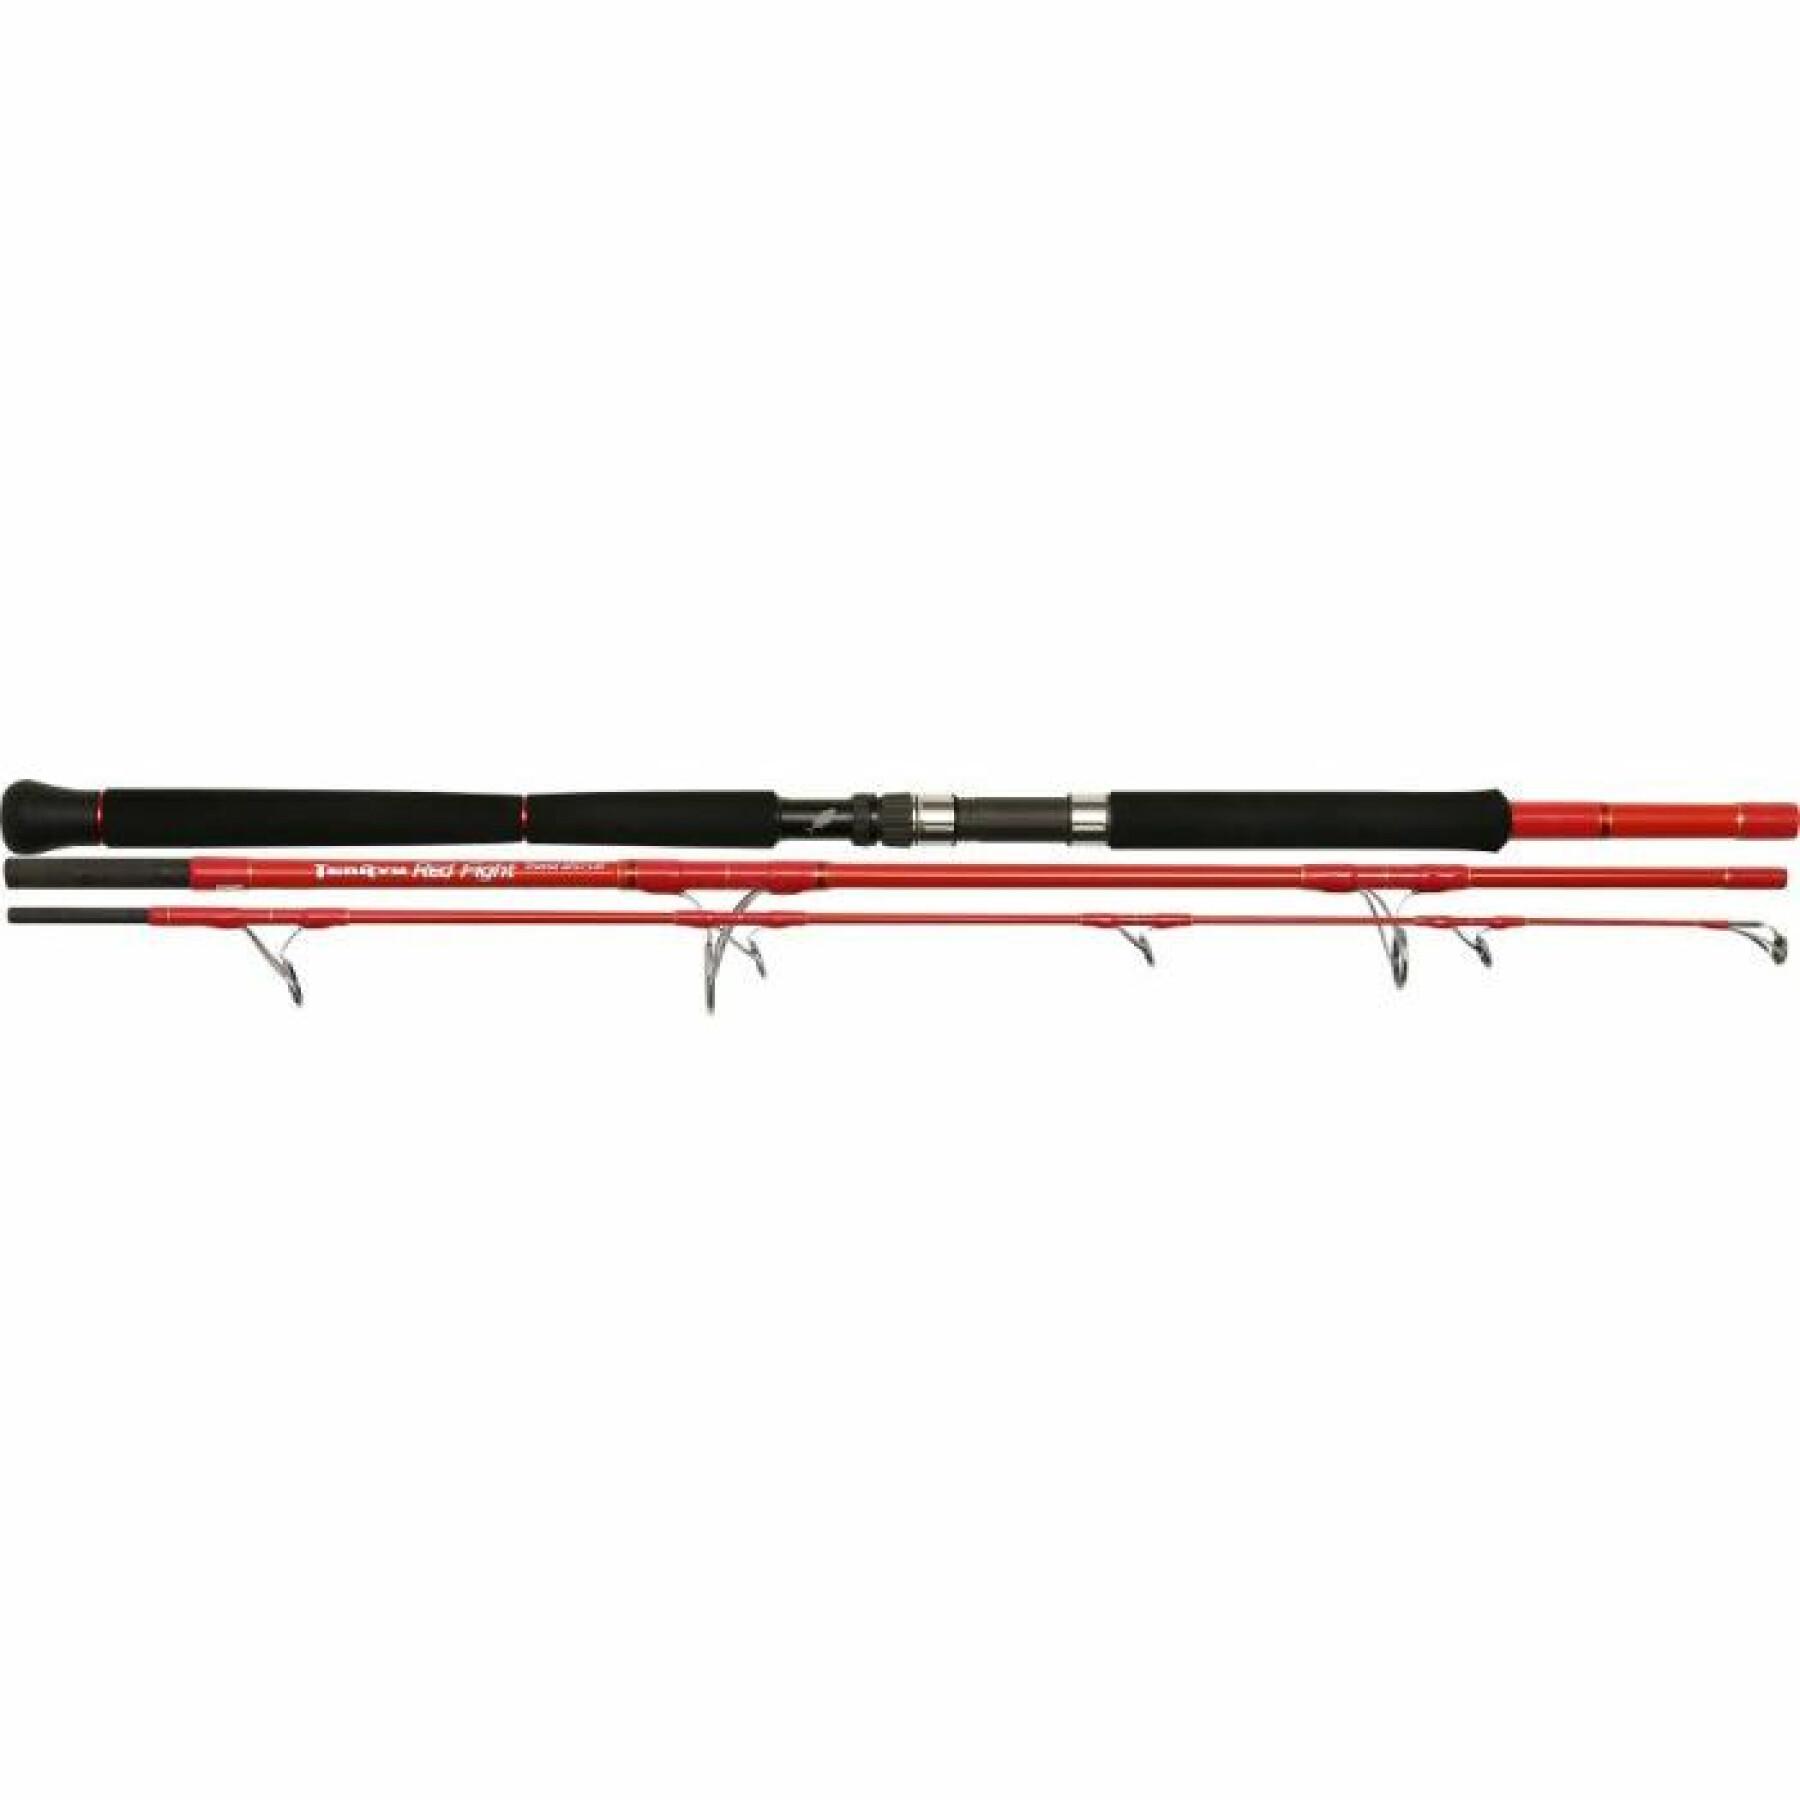 Spinstang Tenryu Red Fight Travel 70-180g